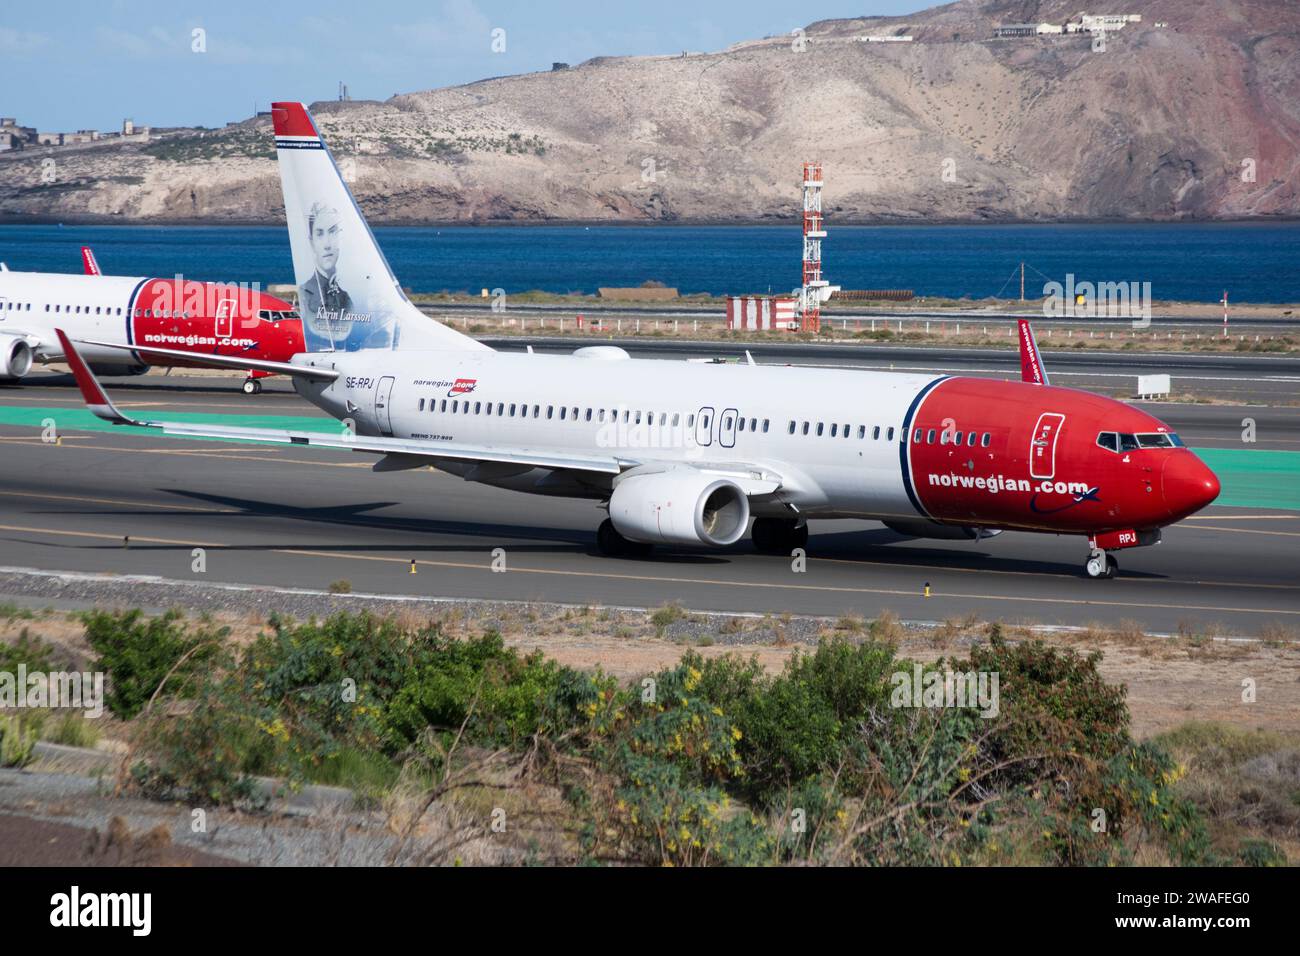 Boeing 737 airliner of the Norwegian Air Sweden airline Stock Photo